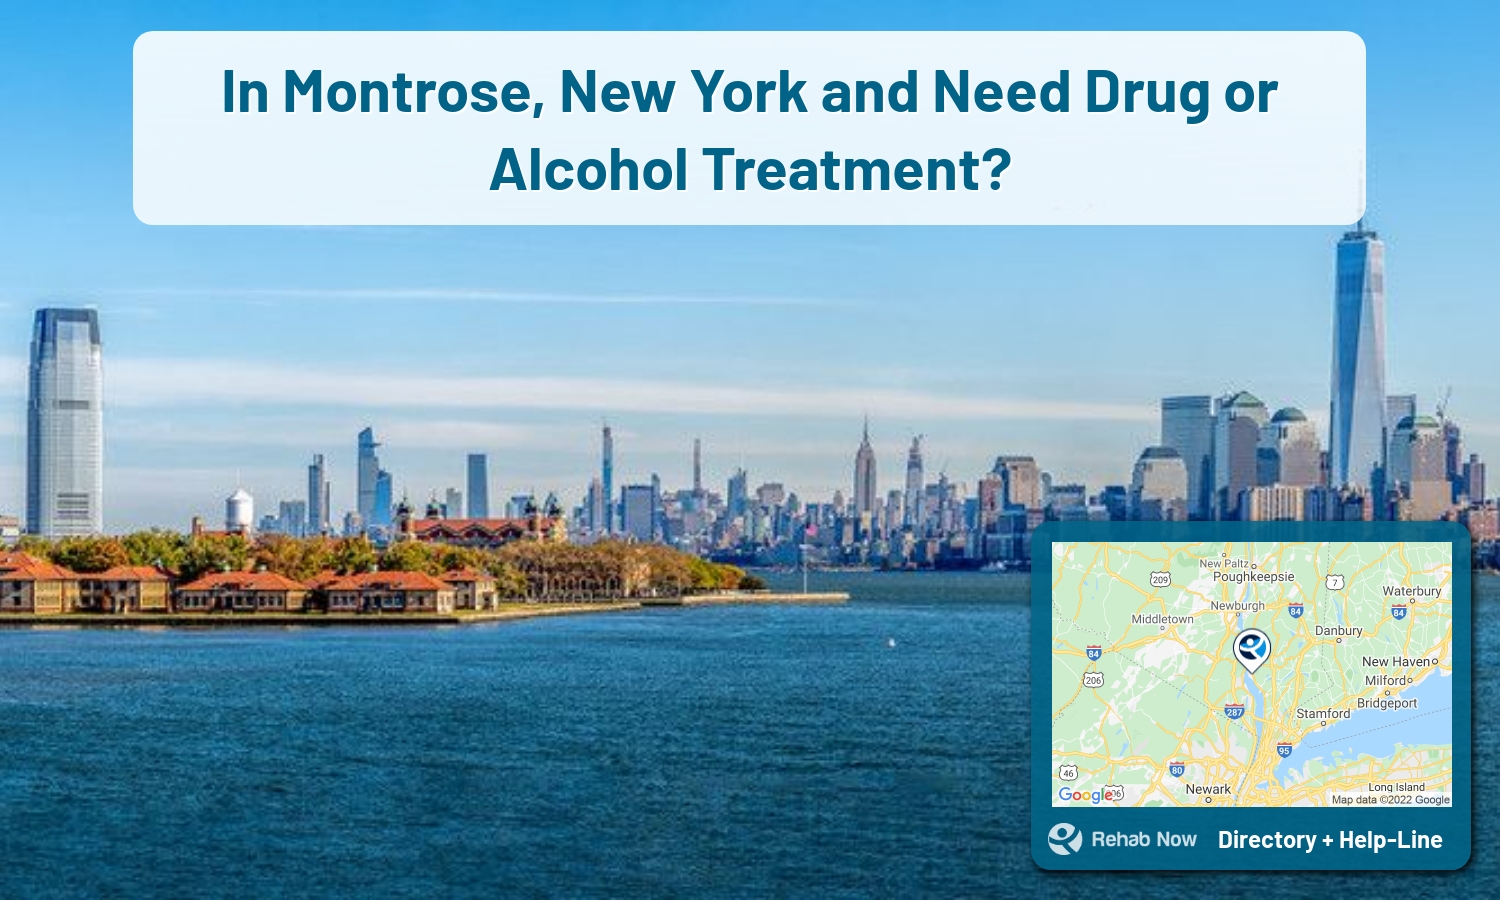 Drug rehab and alcohol treatment services nearby Montrose, NY. Need help choosing a treatment program? Call our free hotline!